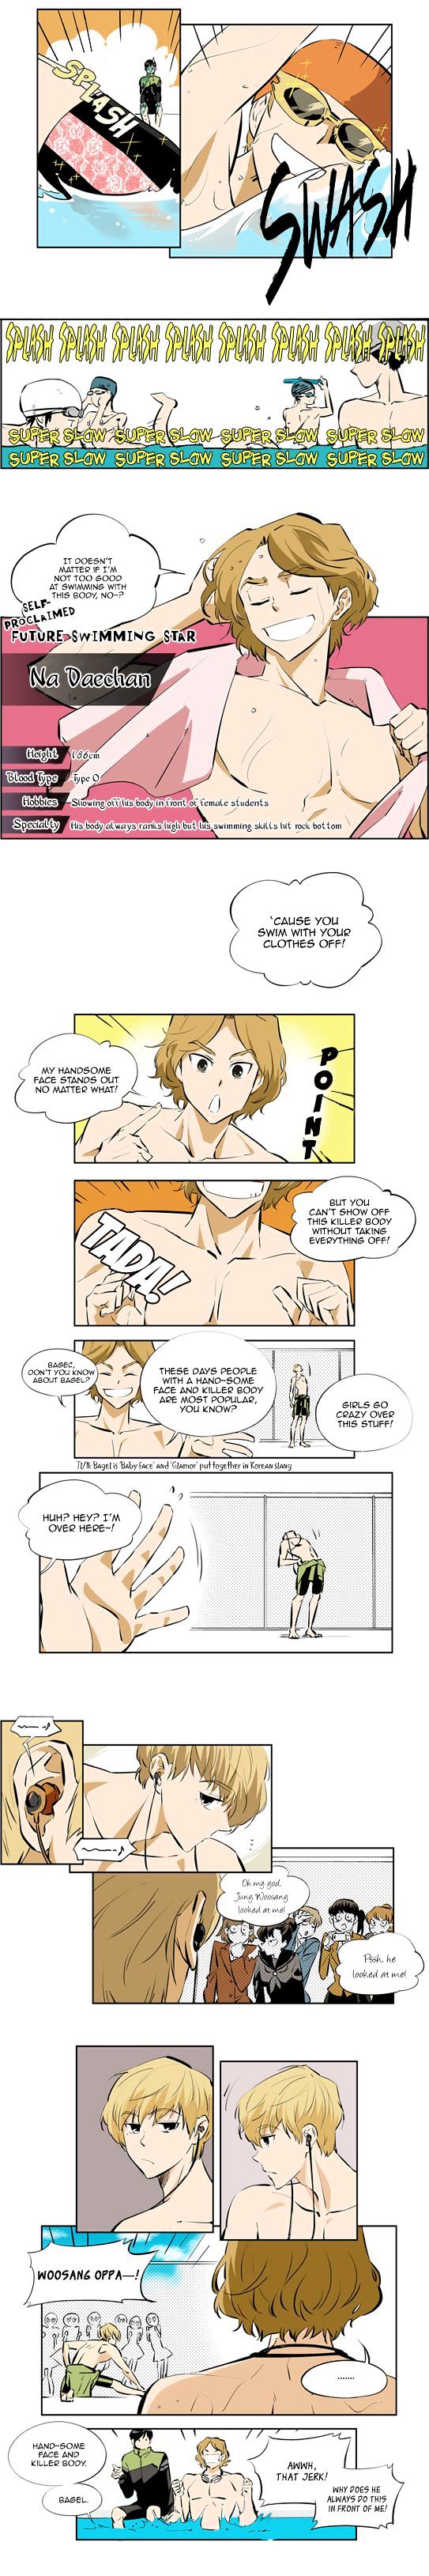 No Breathing - Page 3